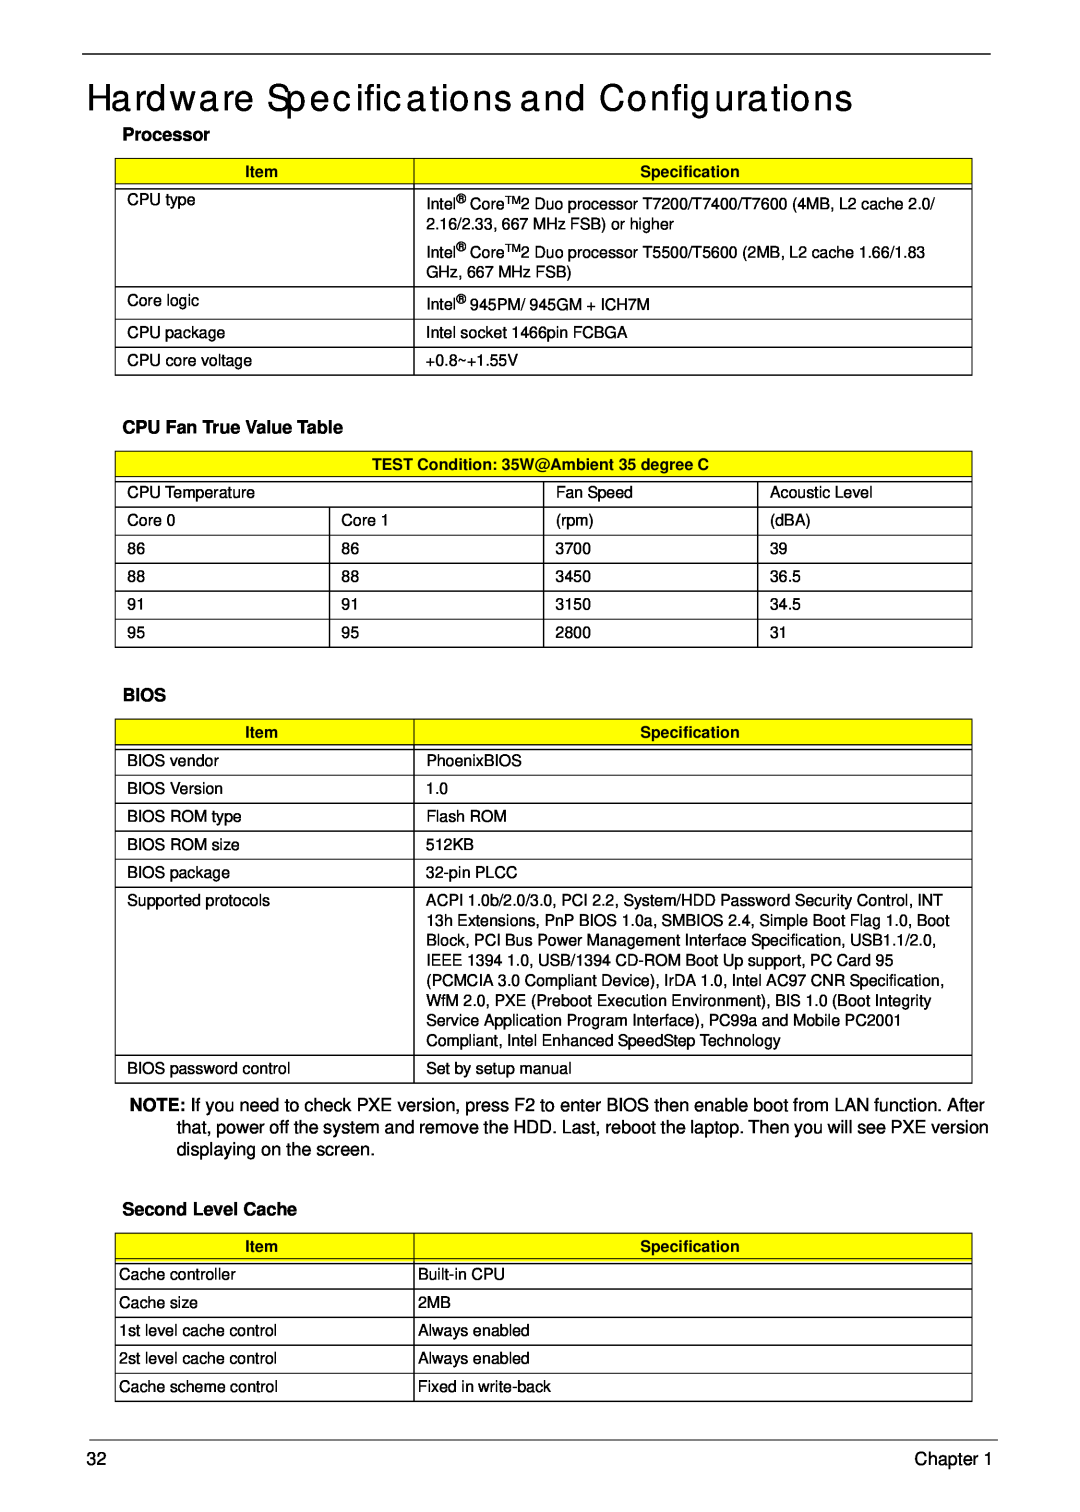 Acer 5310G manual Hardware Specifications and Configurations, Processor, CPU Fan True Value Table, Bios, Second Level Cache 